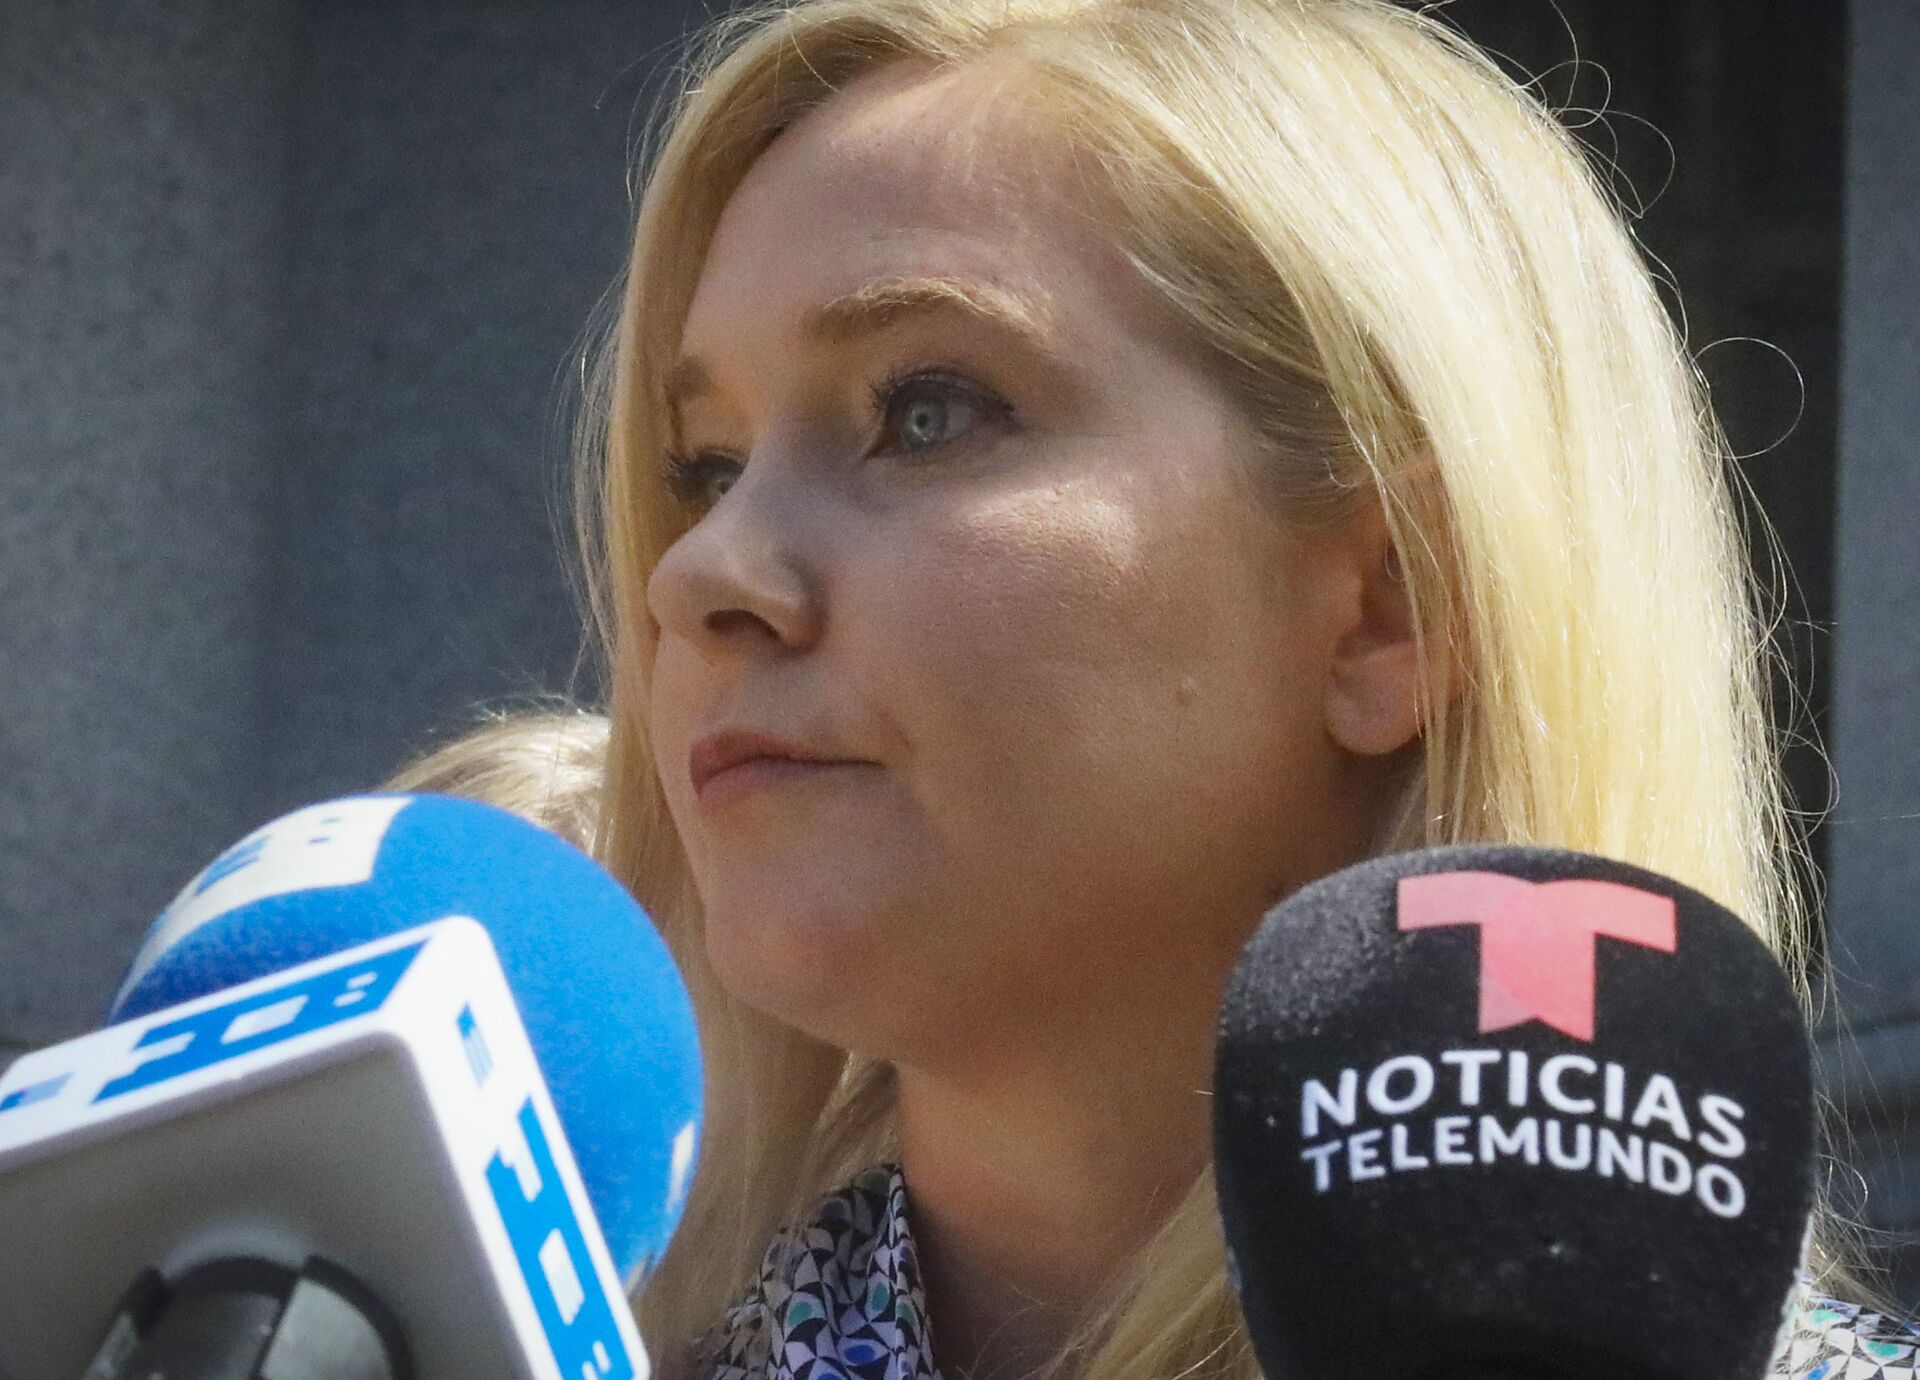 In this Aug. 27, 2019, photo, Virginia Roberts Giuffre, who says she was trafficked by sex offender Jeffrey Epstein, holds a news conference outside a Manhattan court where sexual assault claimants invited by a judge addressed a hearing following Epstein's jailhouse death in New York - Sputnik International, 1920, 02.01.2022